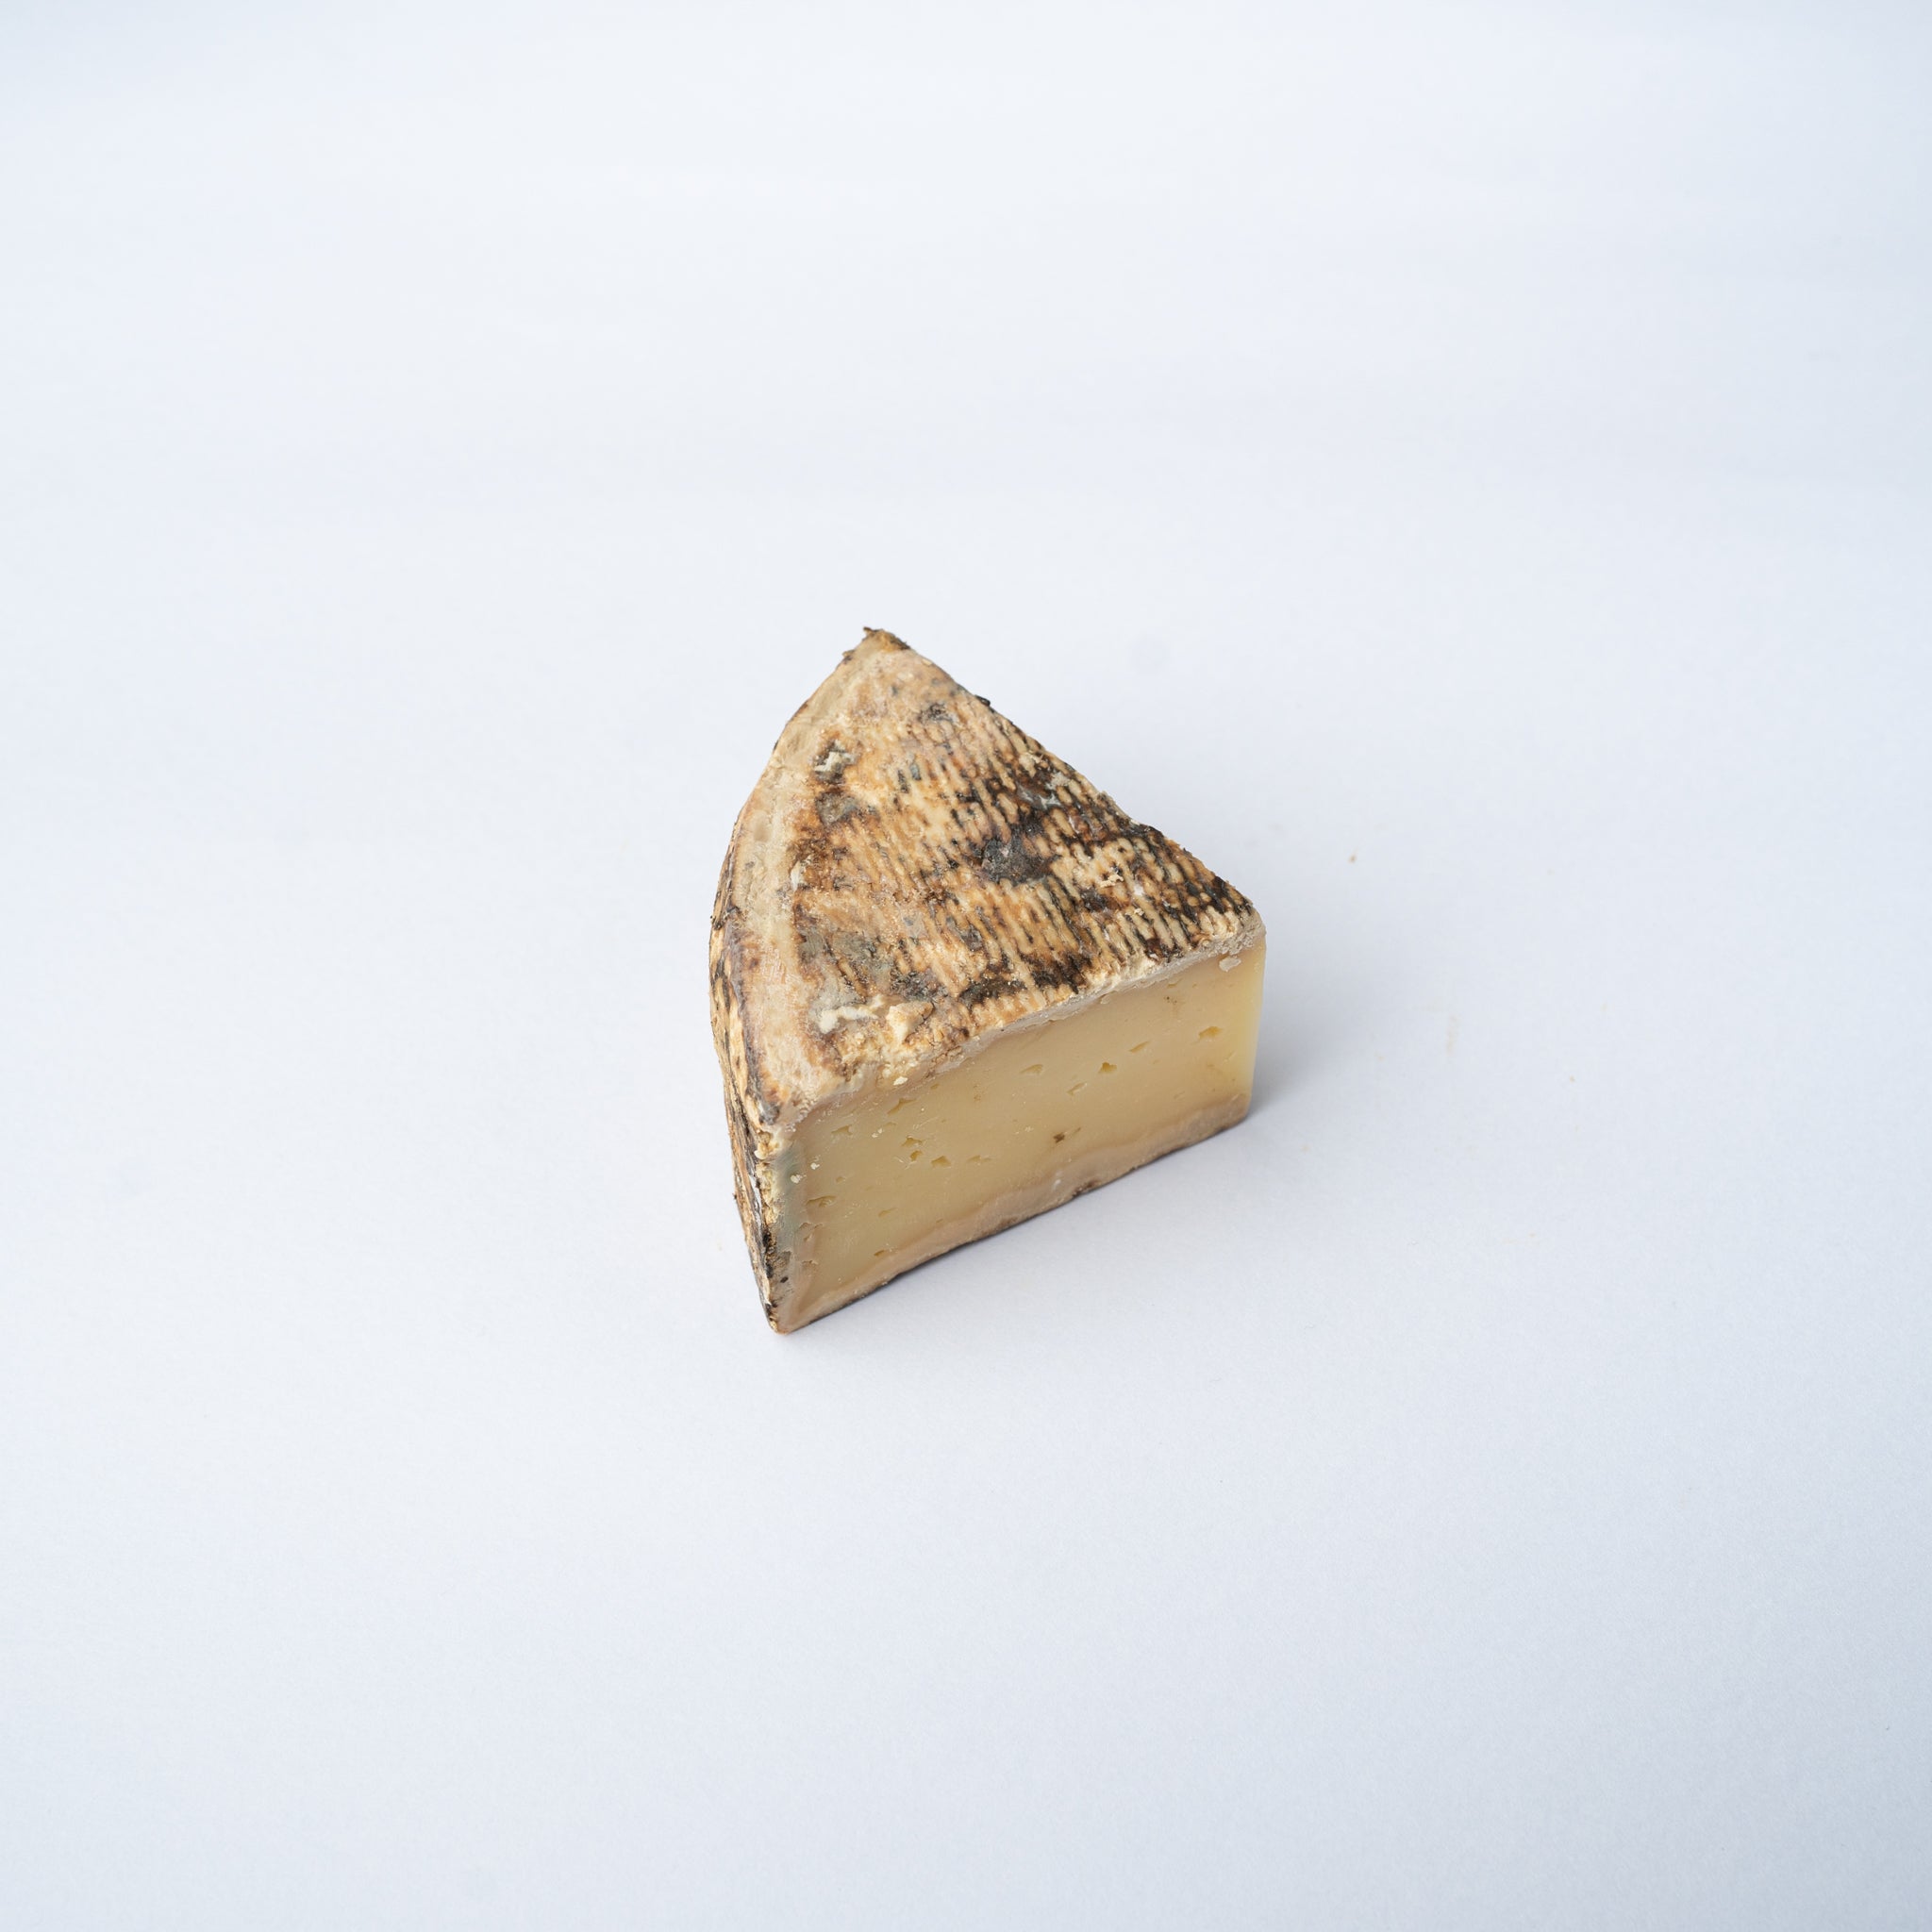 A 200g wedge of Tomme de Savoie cheese.